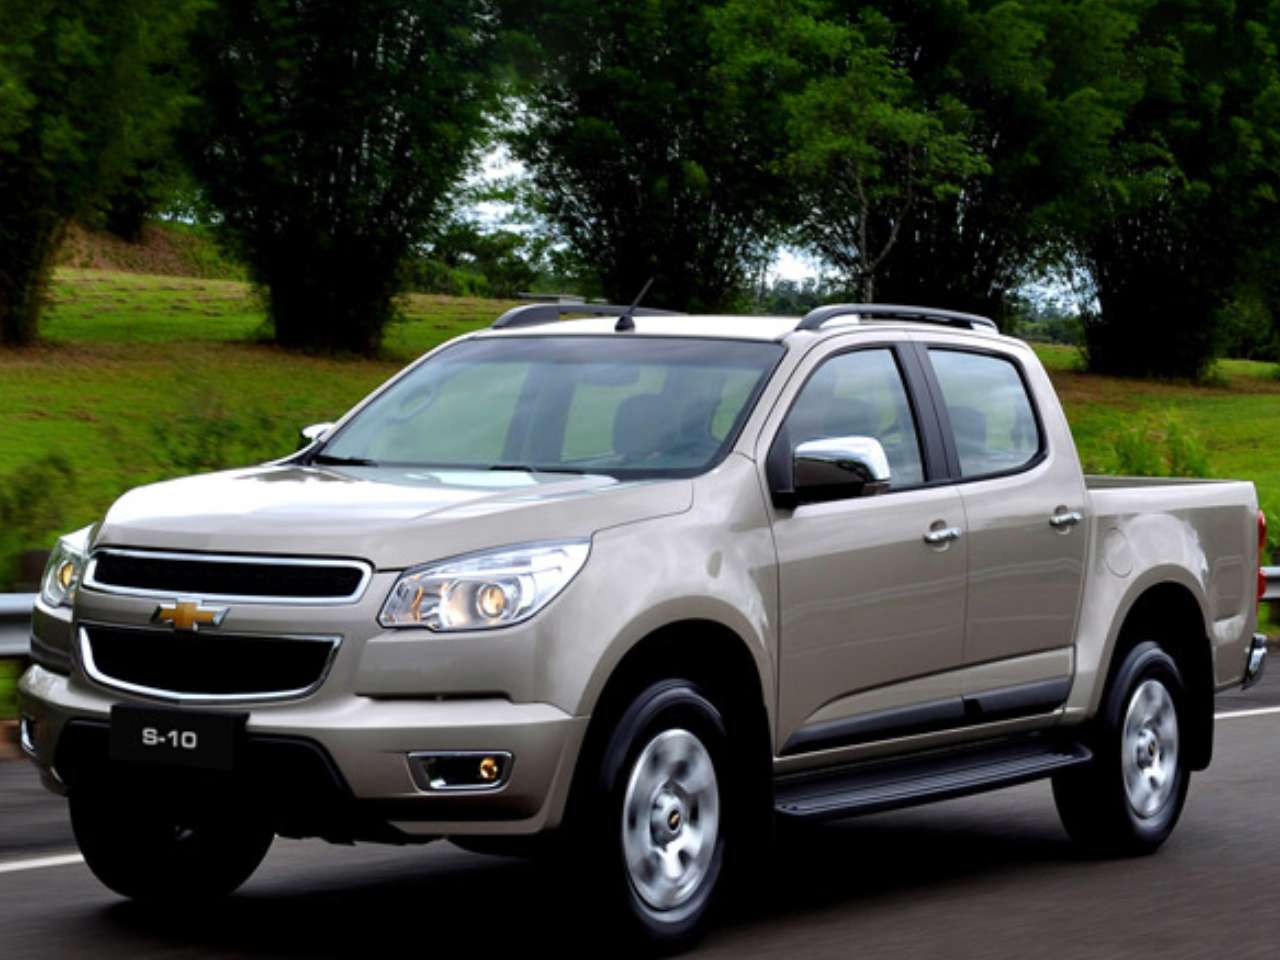 ChevroletS10 2012 - ngulo frontal